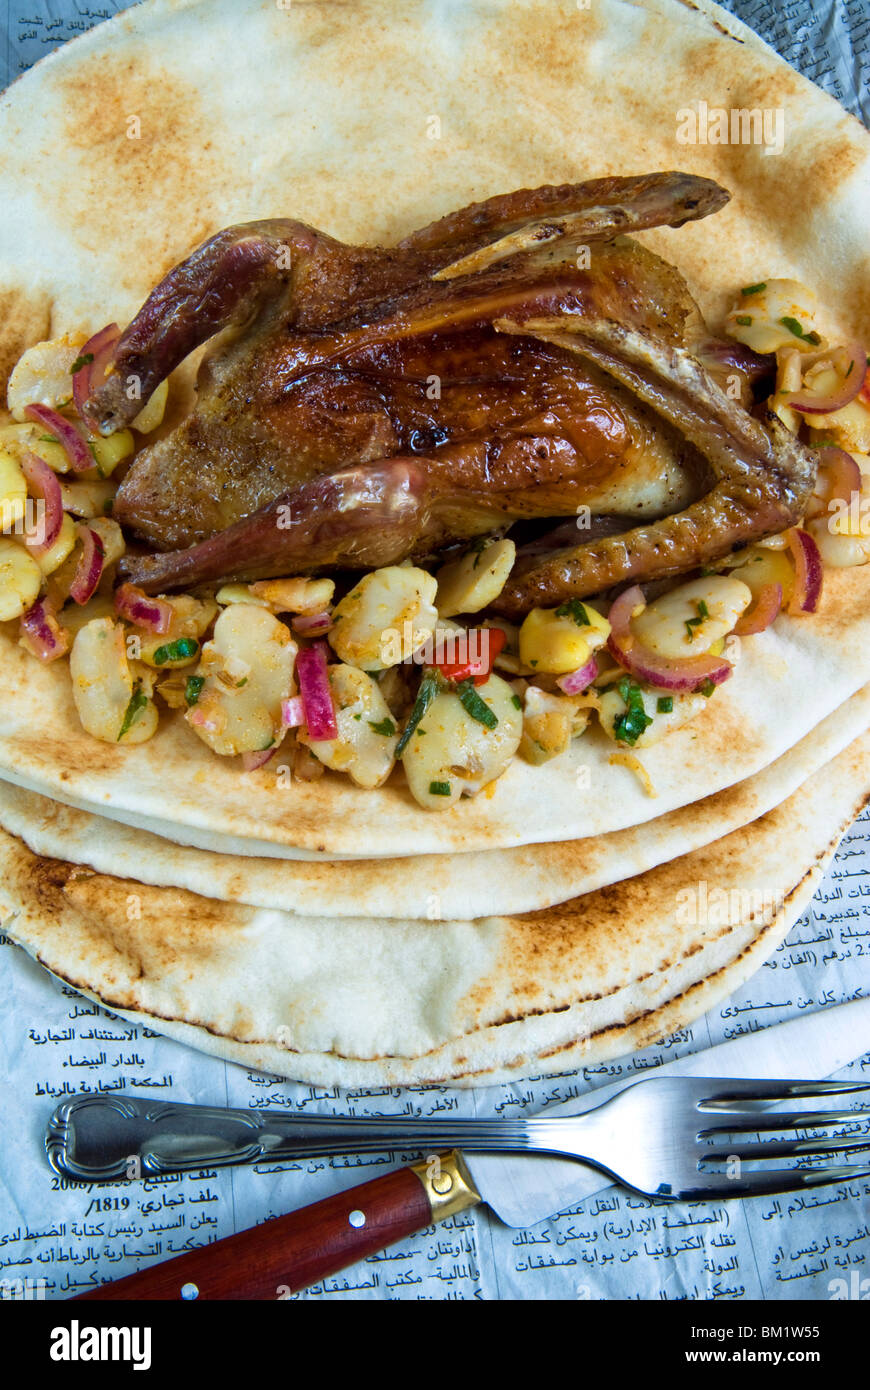 Egyptian roasted pigeon, Middle Eastern food, Egypt, North Africa, Africa Stock Photo